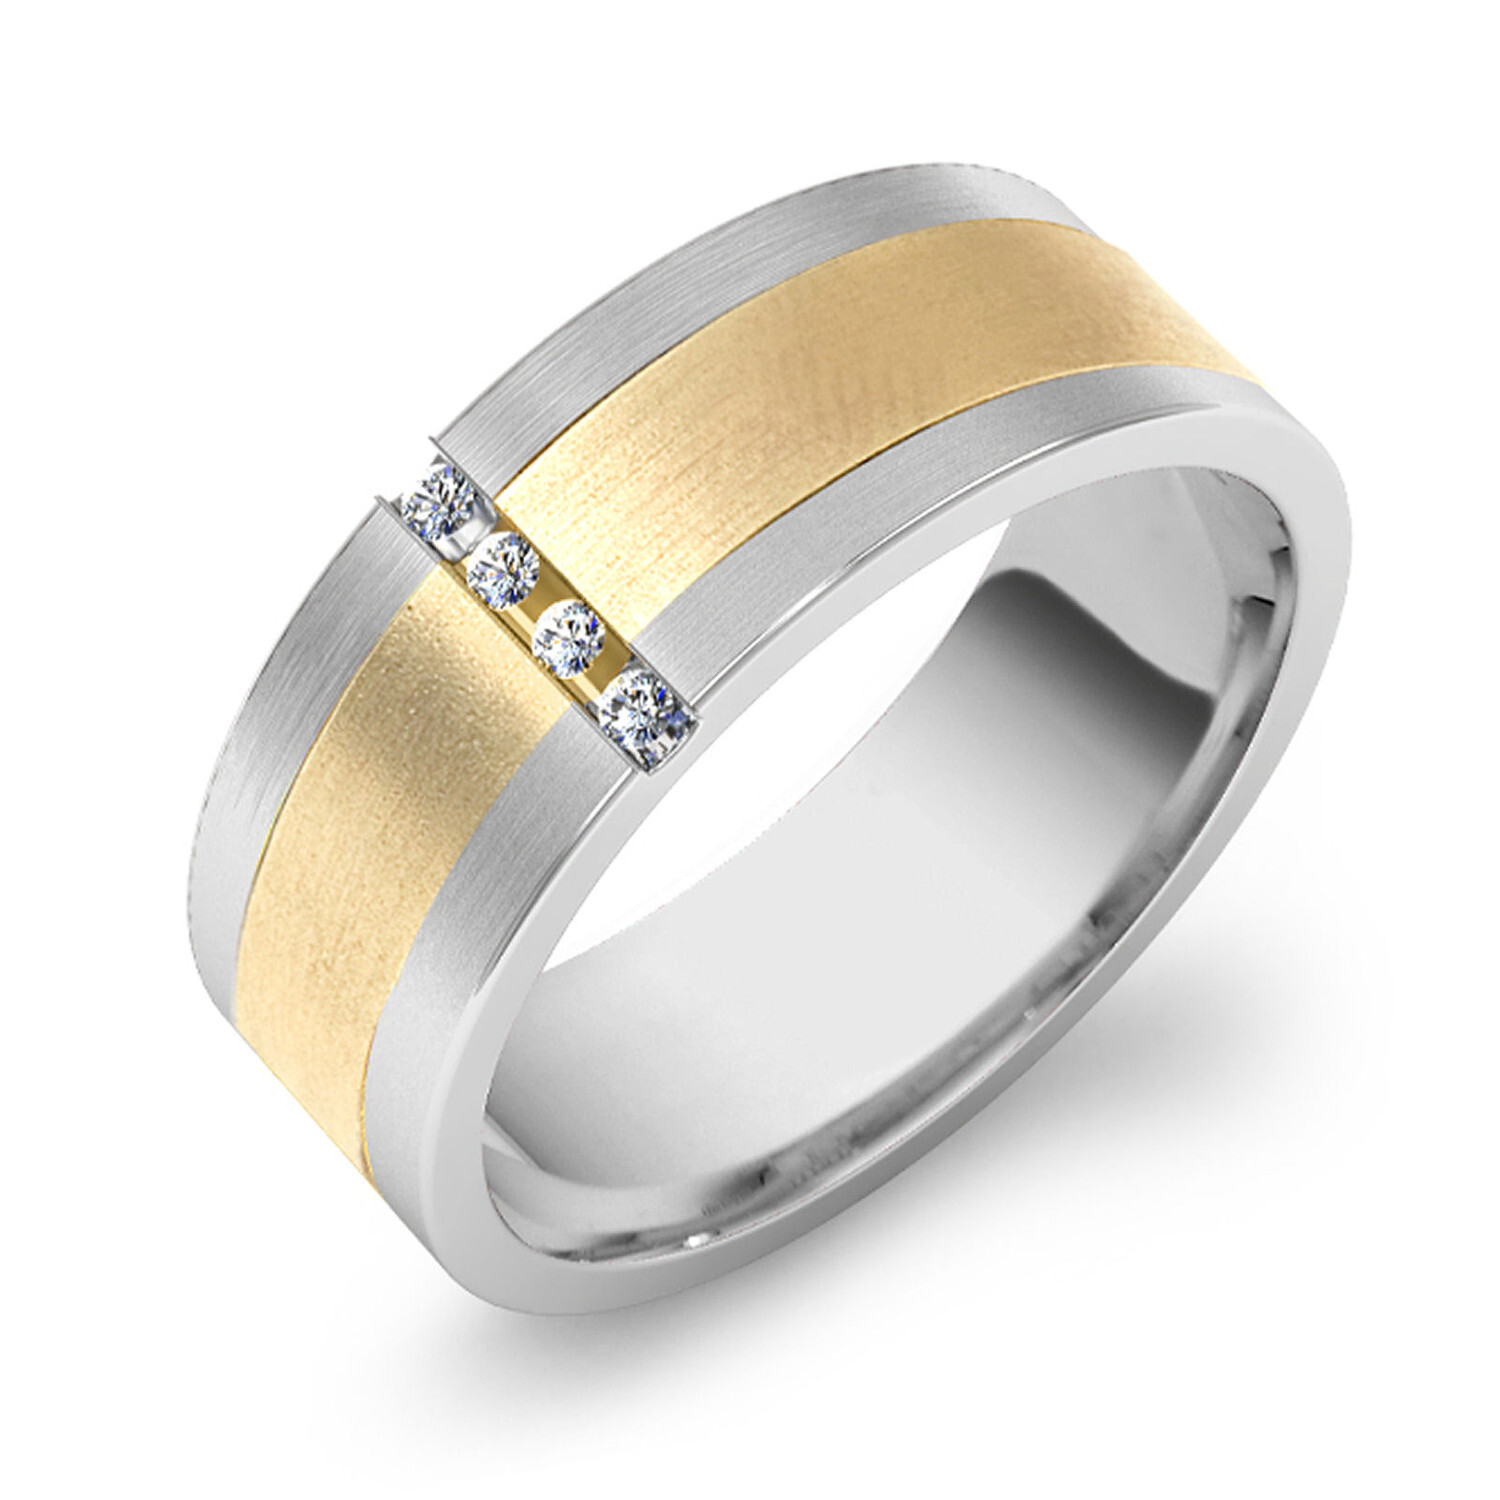 JQS0238 Wedding Ring from JQS Wedding Rings - hitched.co.uk